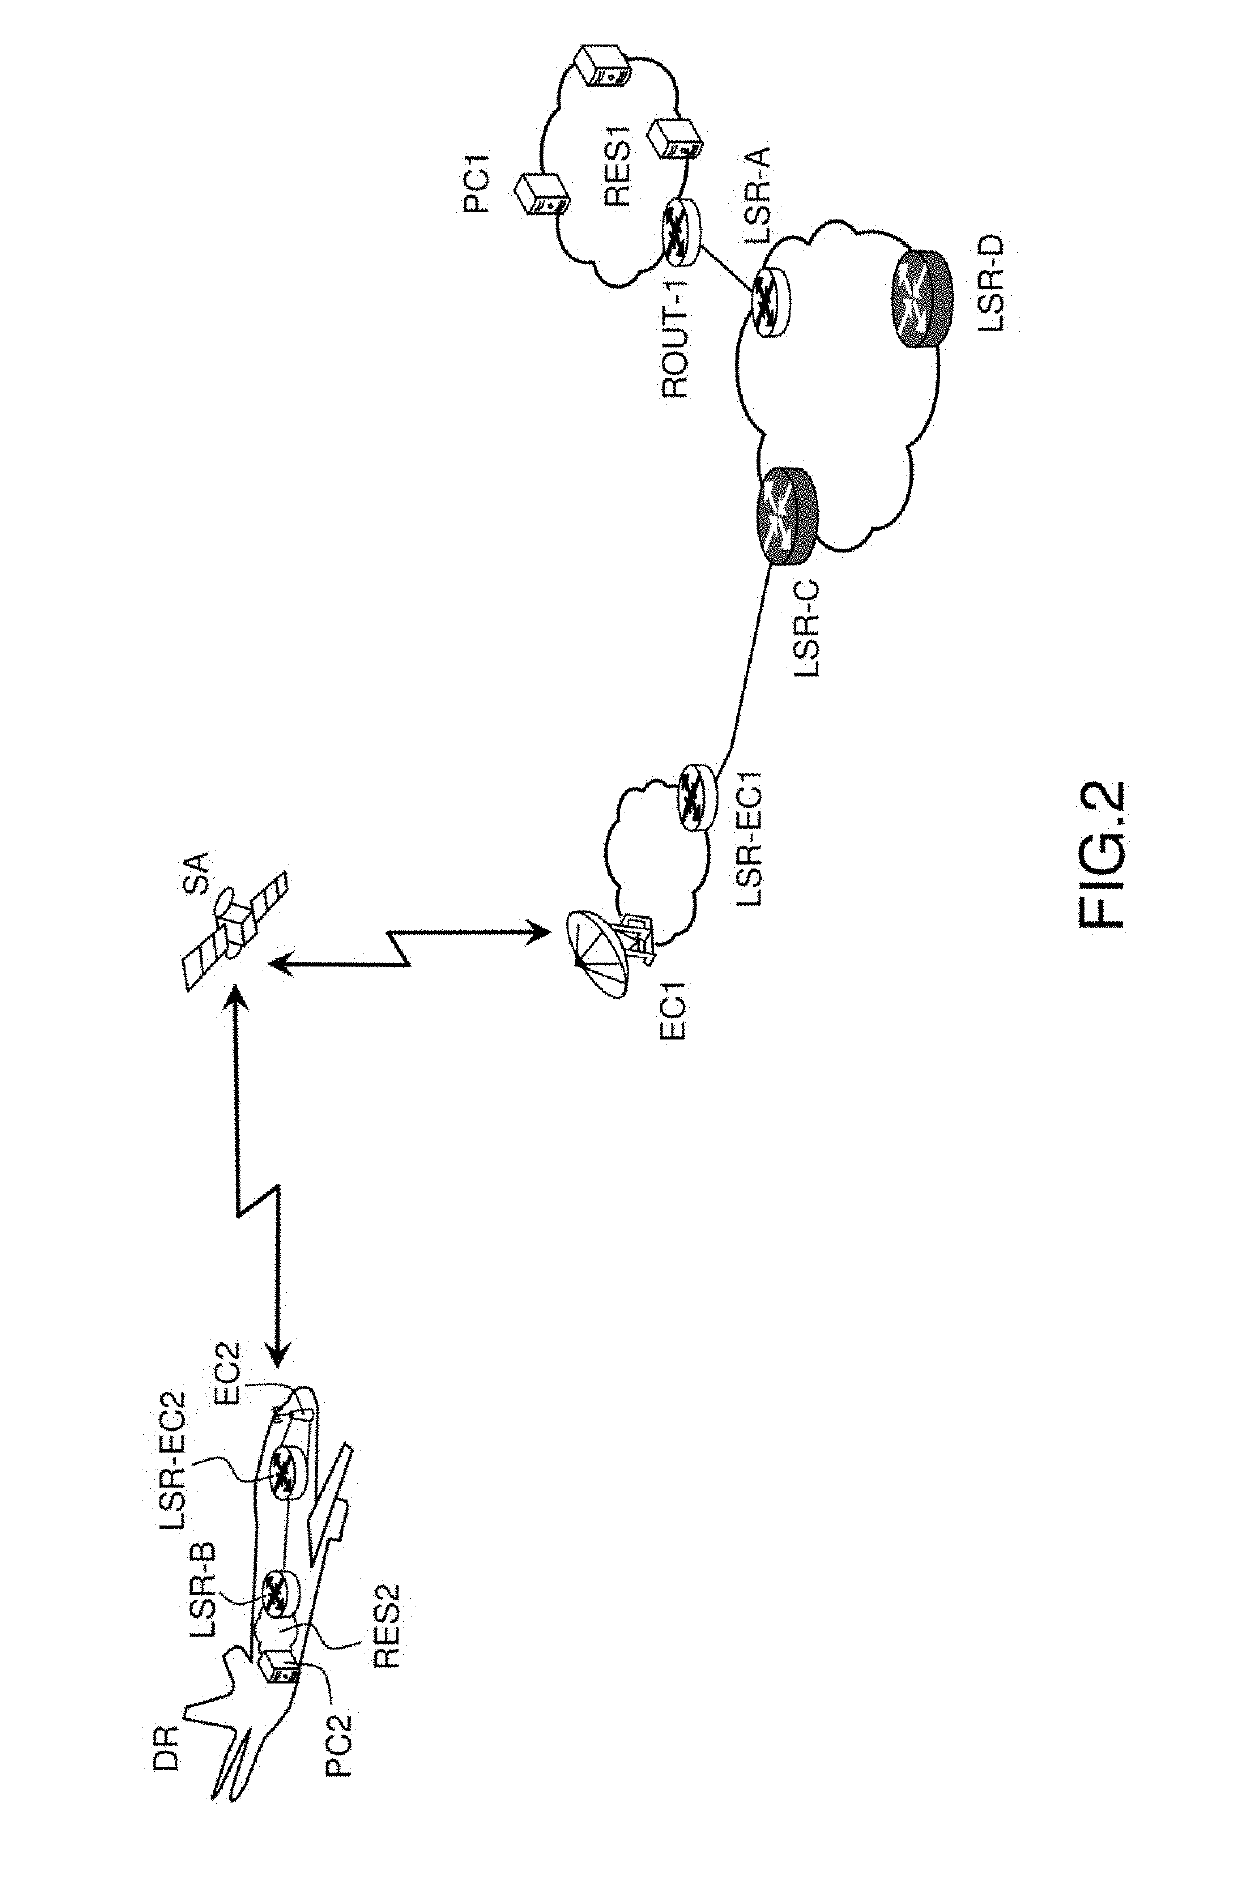 Method of optimizing spectral efficiency in an mpls interconnection context